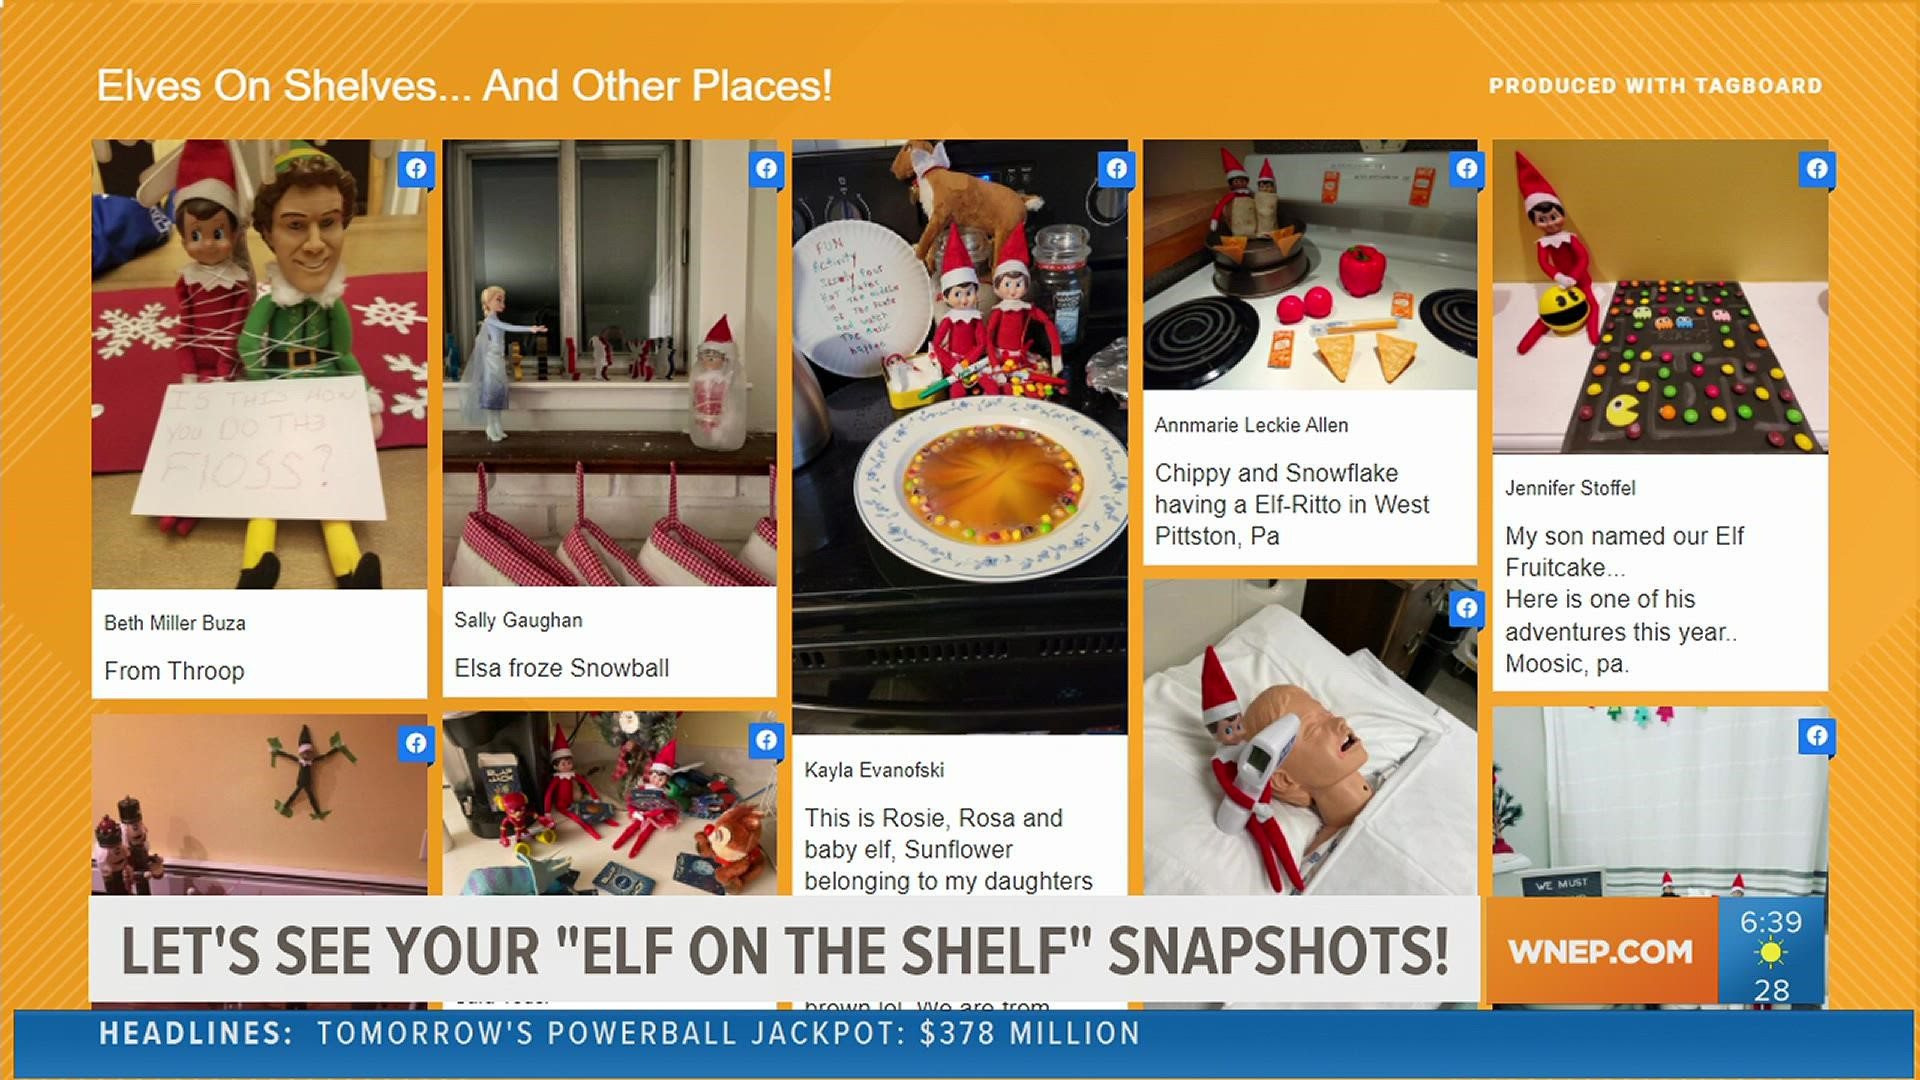 From toilet papering homes and classrooms, so many of you shared your hilarious "Elf on the Shelf" moments with Newswatch 16's Ryan Leckey.